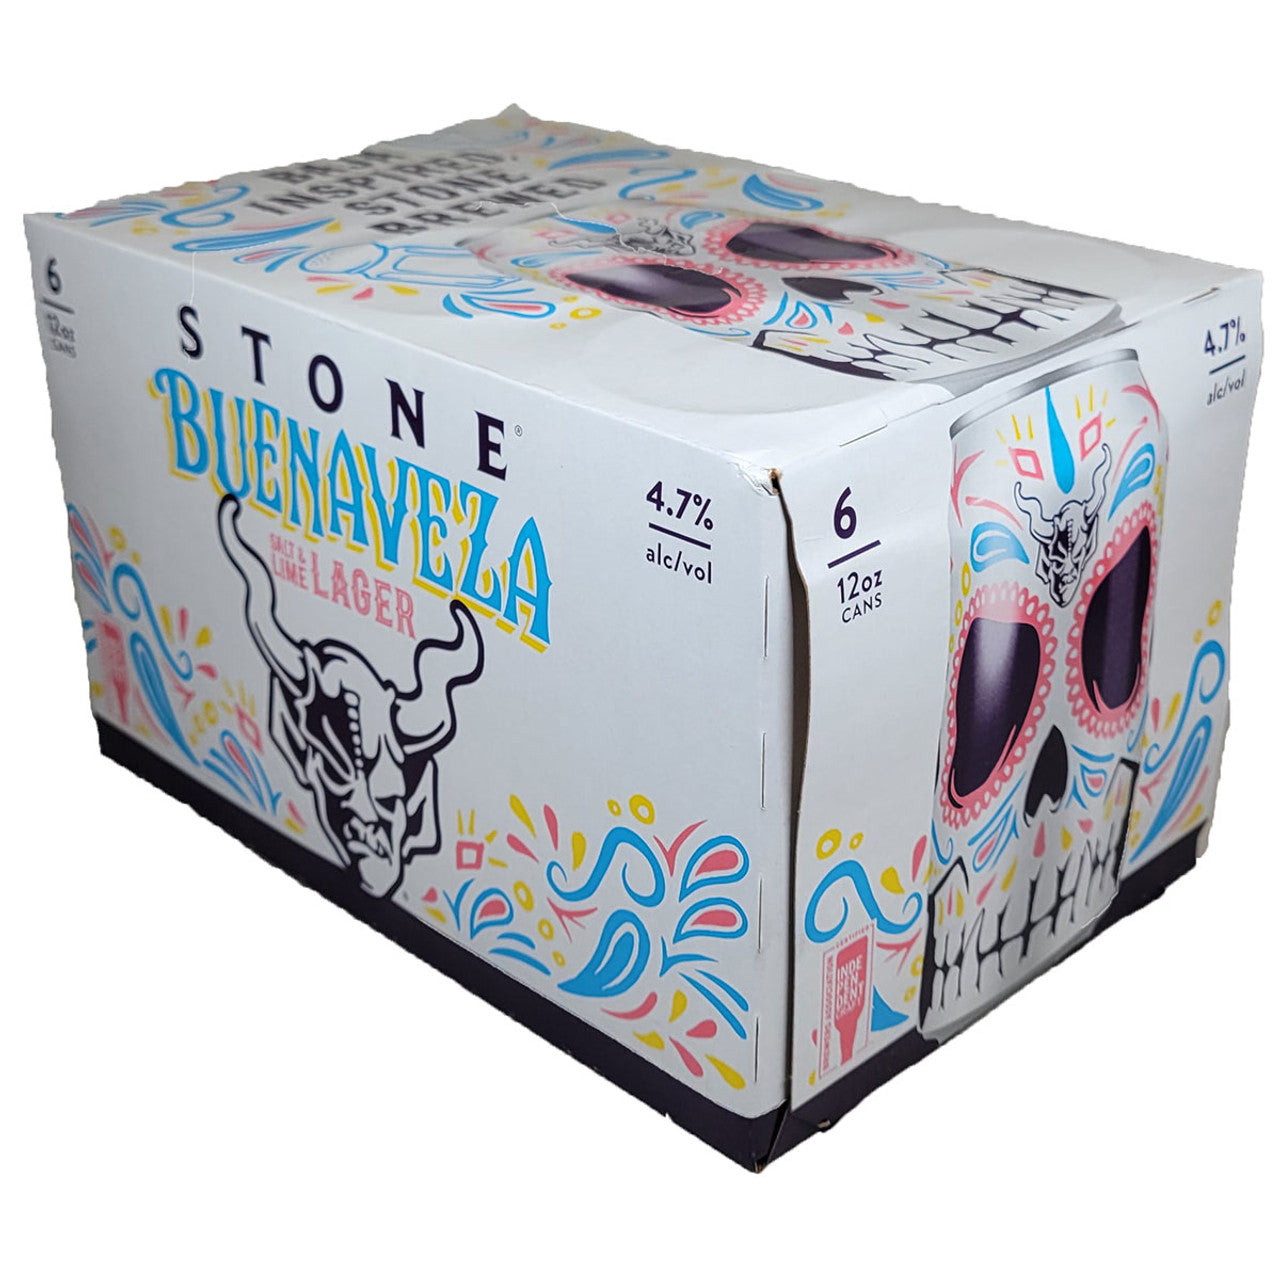 Stone Delicious Buenaveza Salt & Lime Lager 6-Pack (12 FL OZ Per Can)